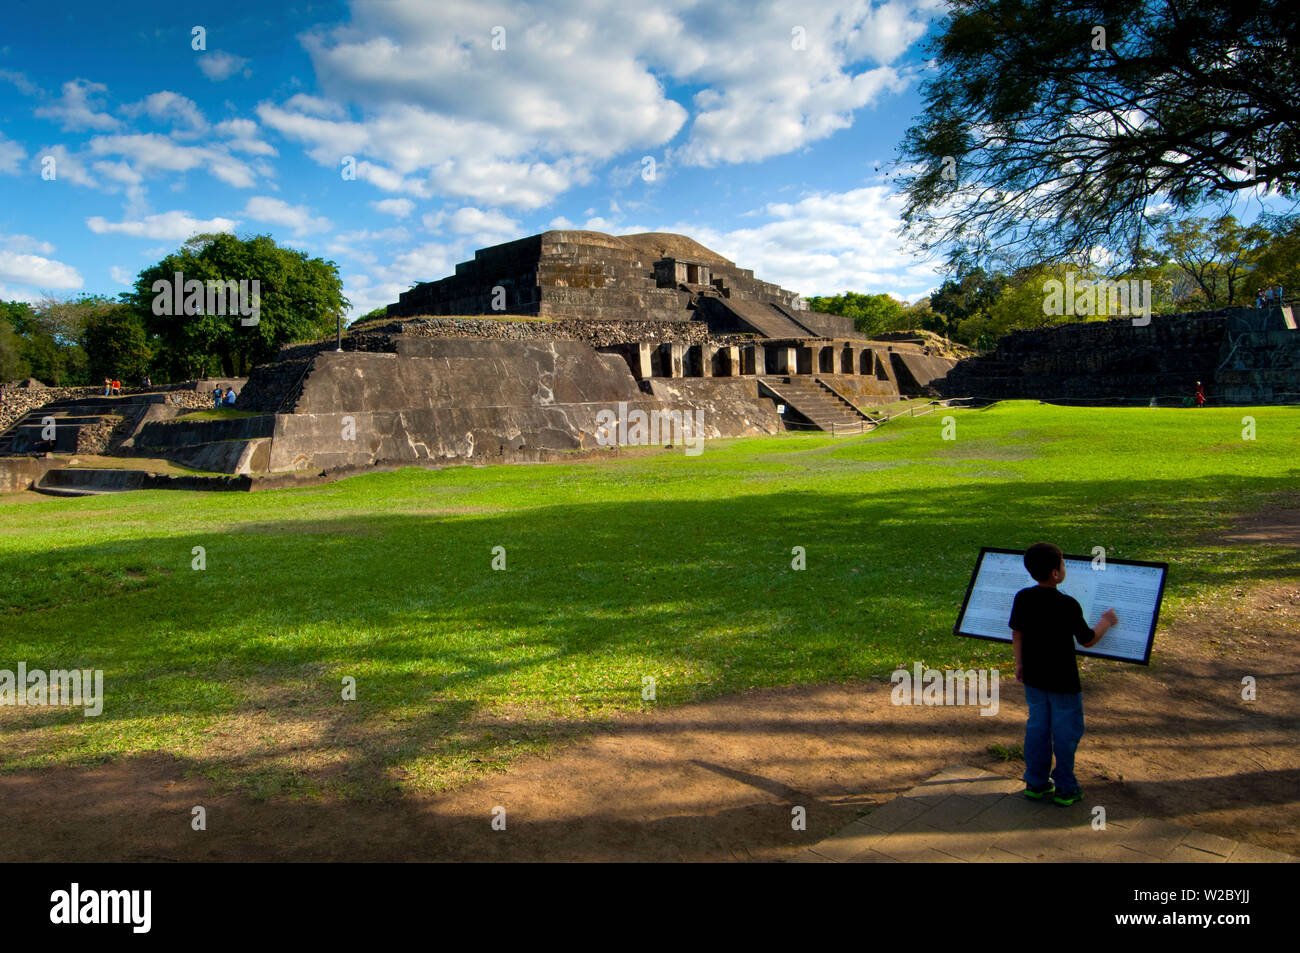 Tazumal Mayan Ruins, Located In Chalchuapa, El Salvador, Main Pyramid, Pre-Colombian Archeological Site, Most Important And Best Preserved Mayan Ruins In El Salvador, Tazumal Translates To 'The Place Where The Victims Were Burned', Department Of Santa Ana Stock Photo